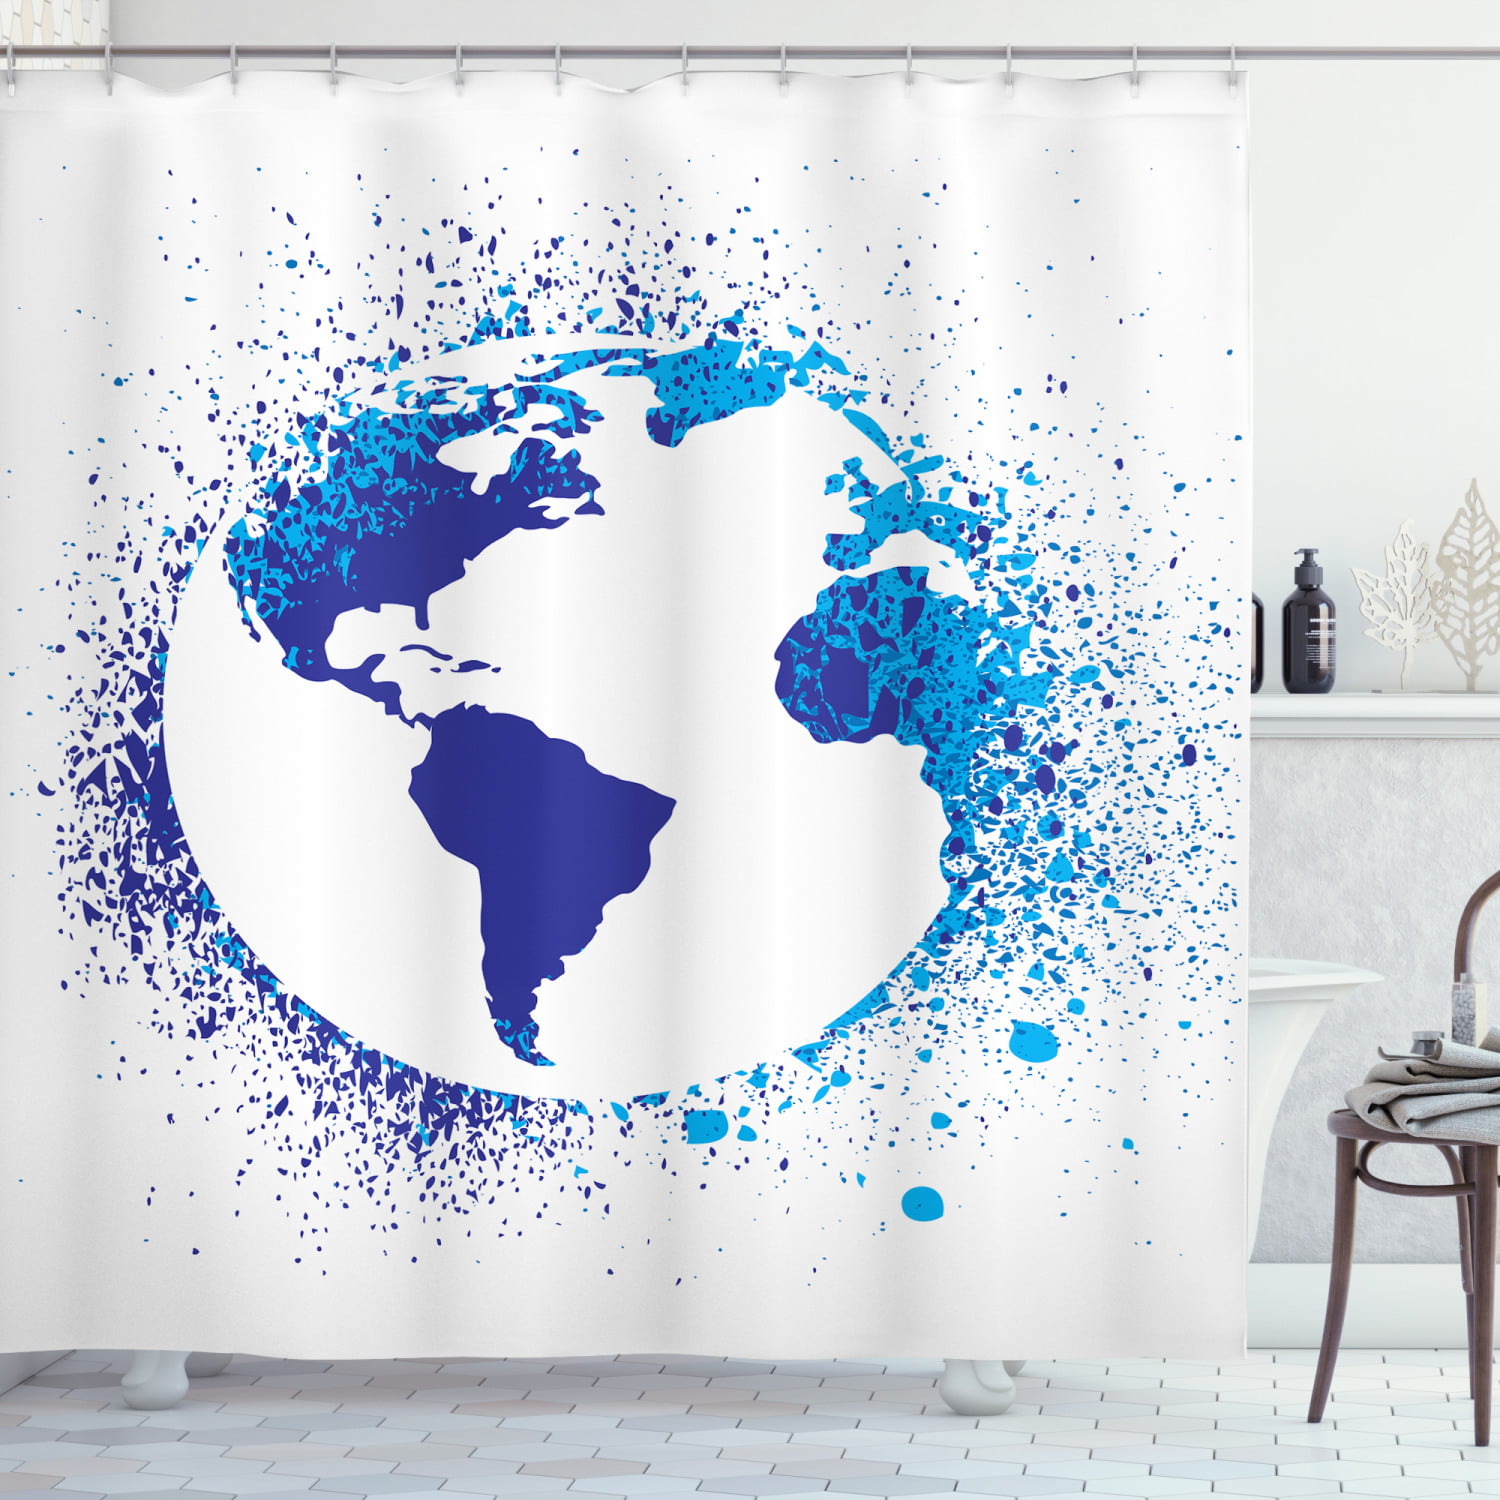 Details about   World Waterproof Polyester Fabric Bathroom Shower Curtain Arts Decor Mould Proof 